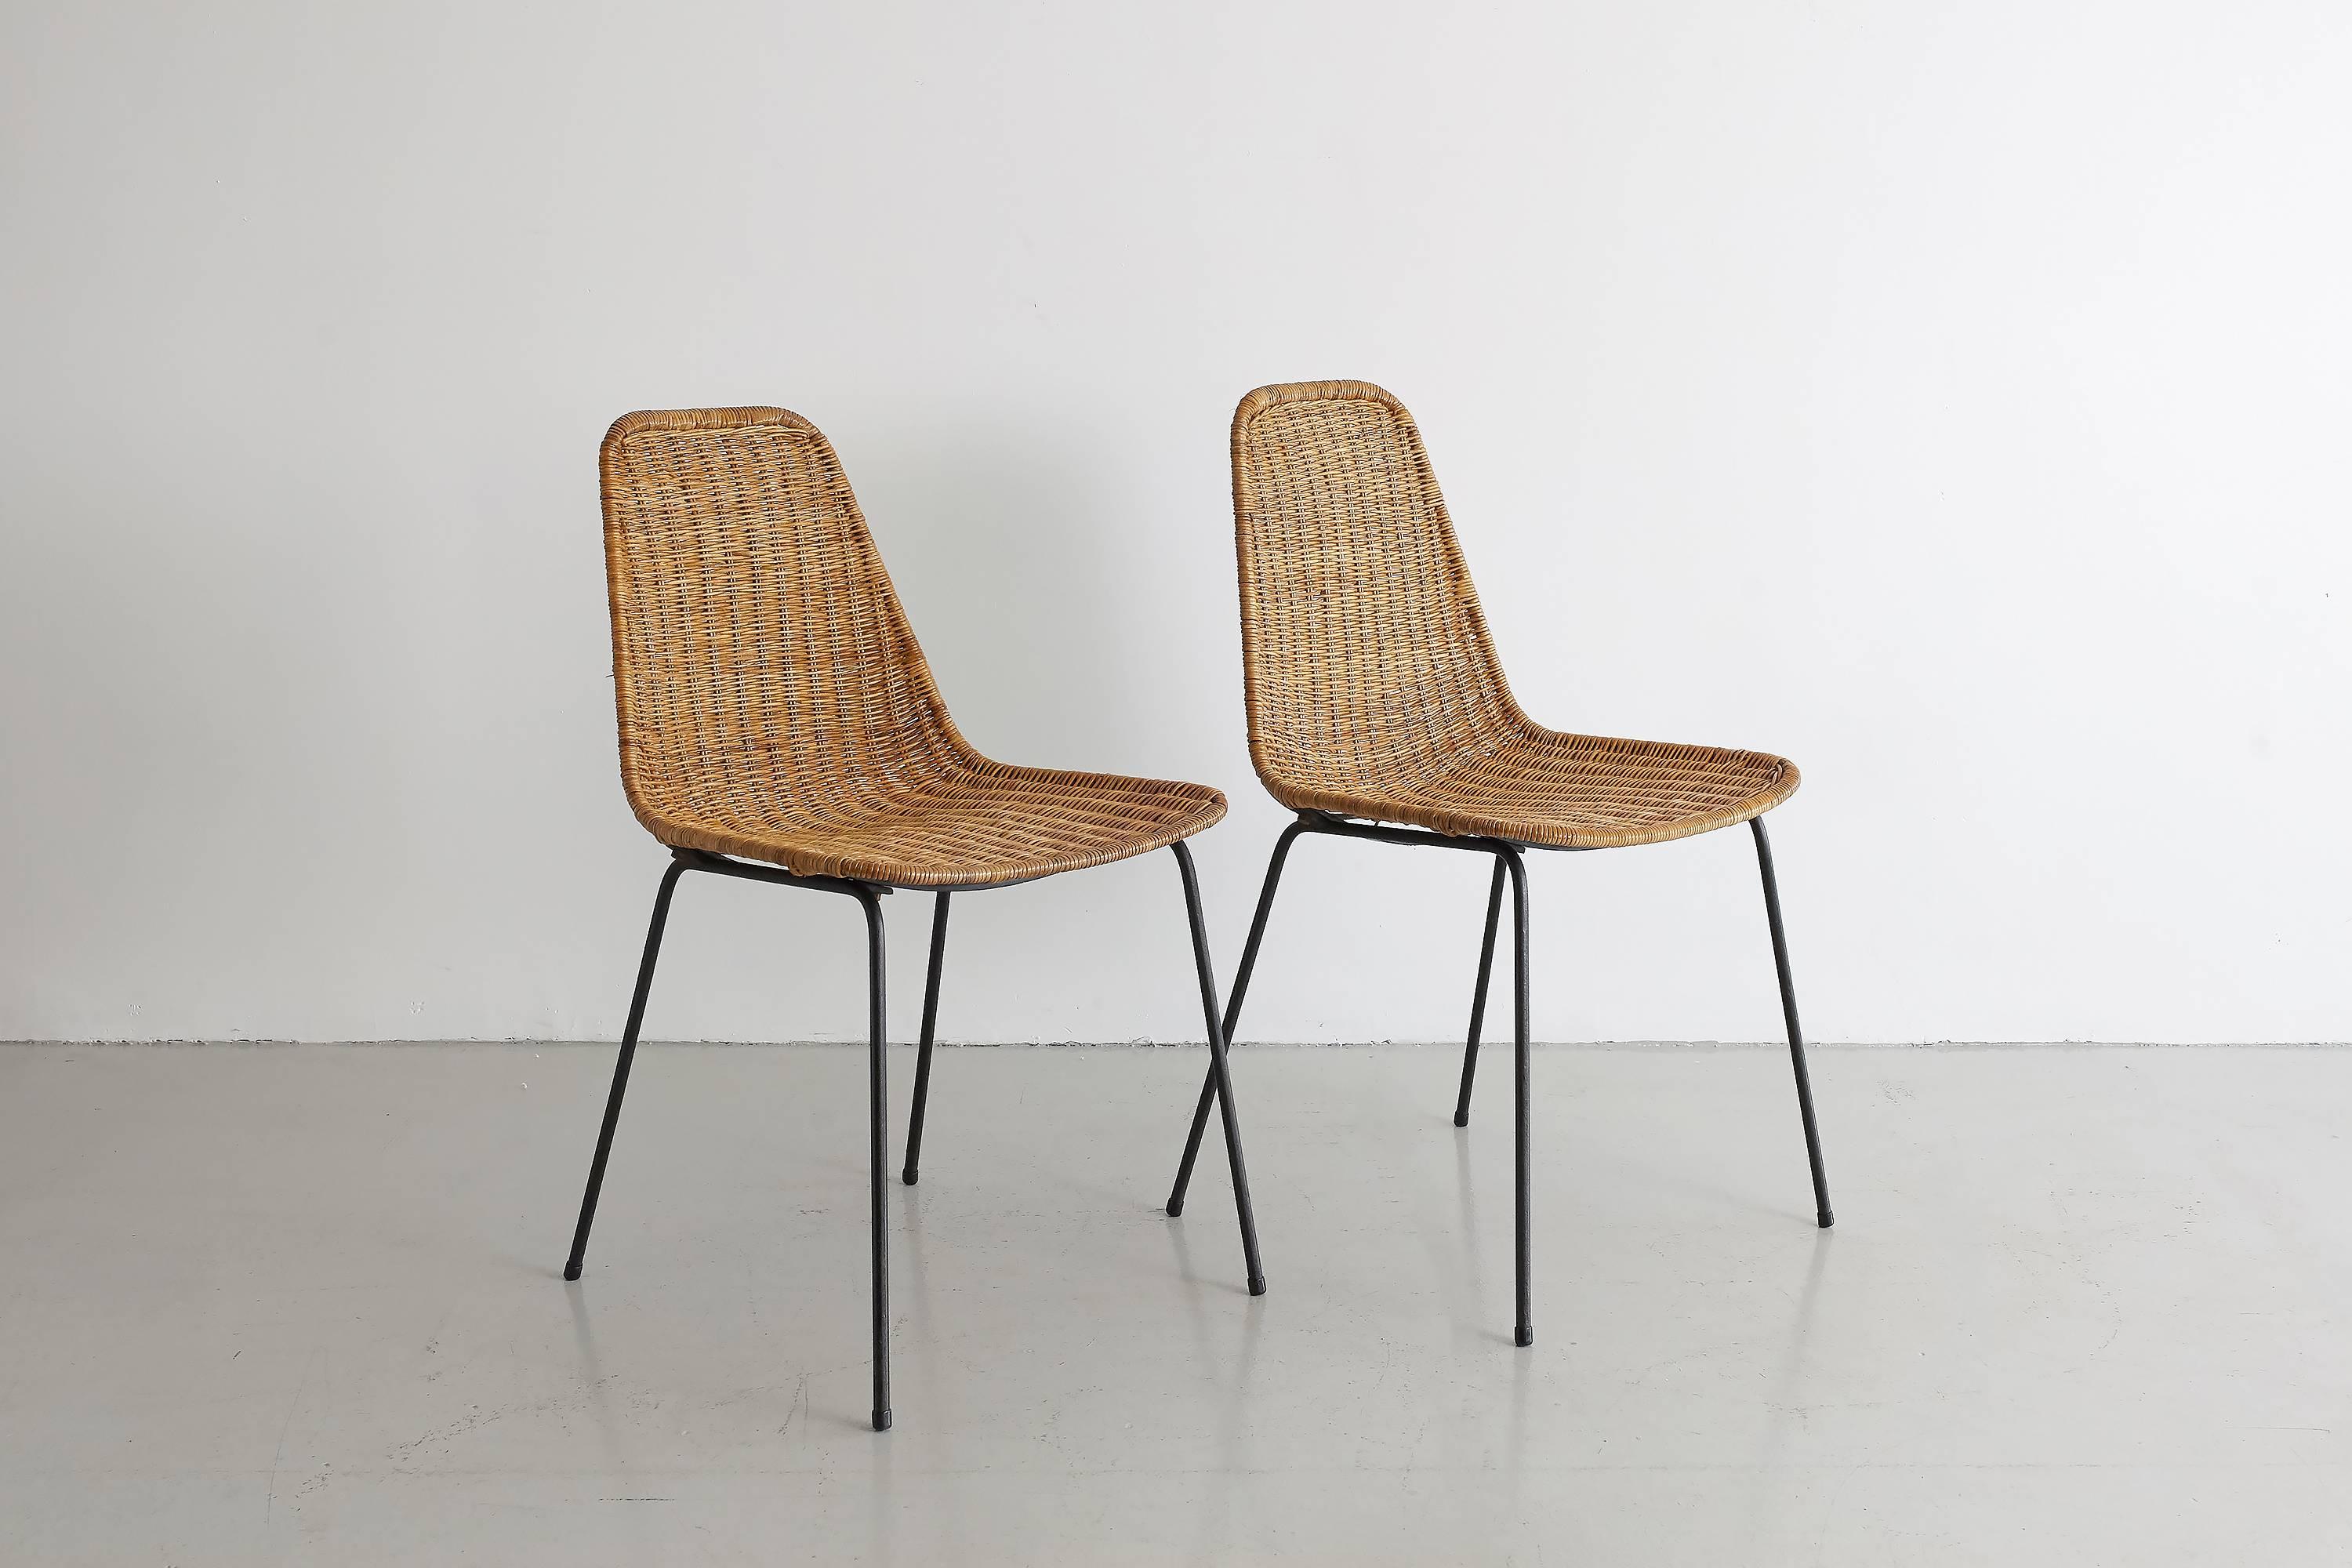 Pair of wicker chairs by Carlo Graffi & Franco Campo with inset black iron legs and bucket seats. Measures: Seat height 17